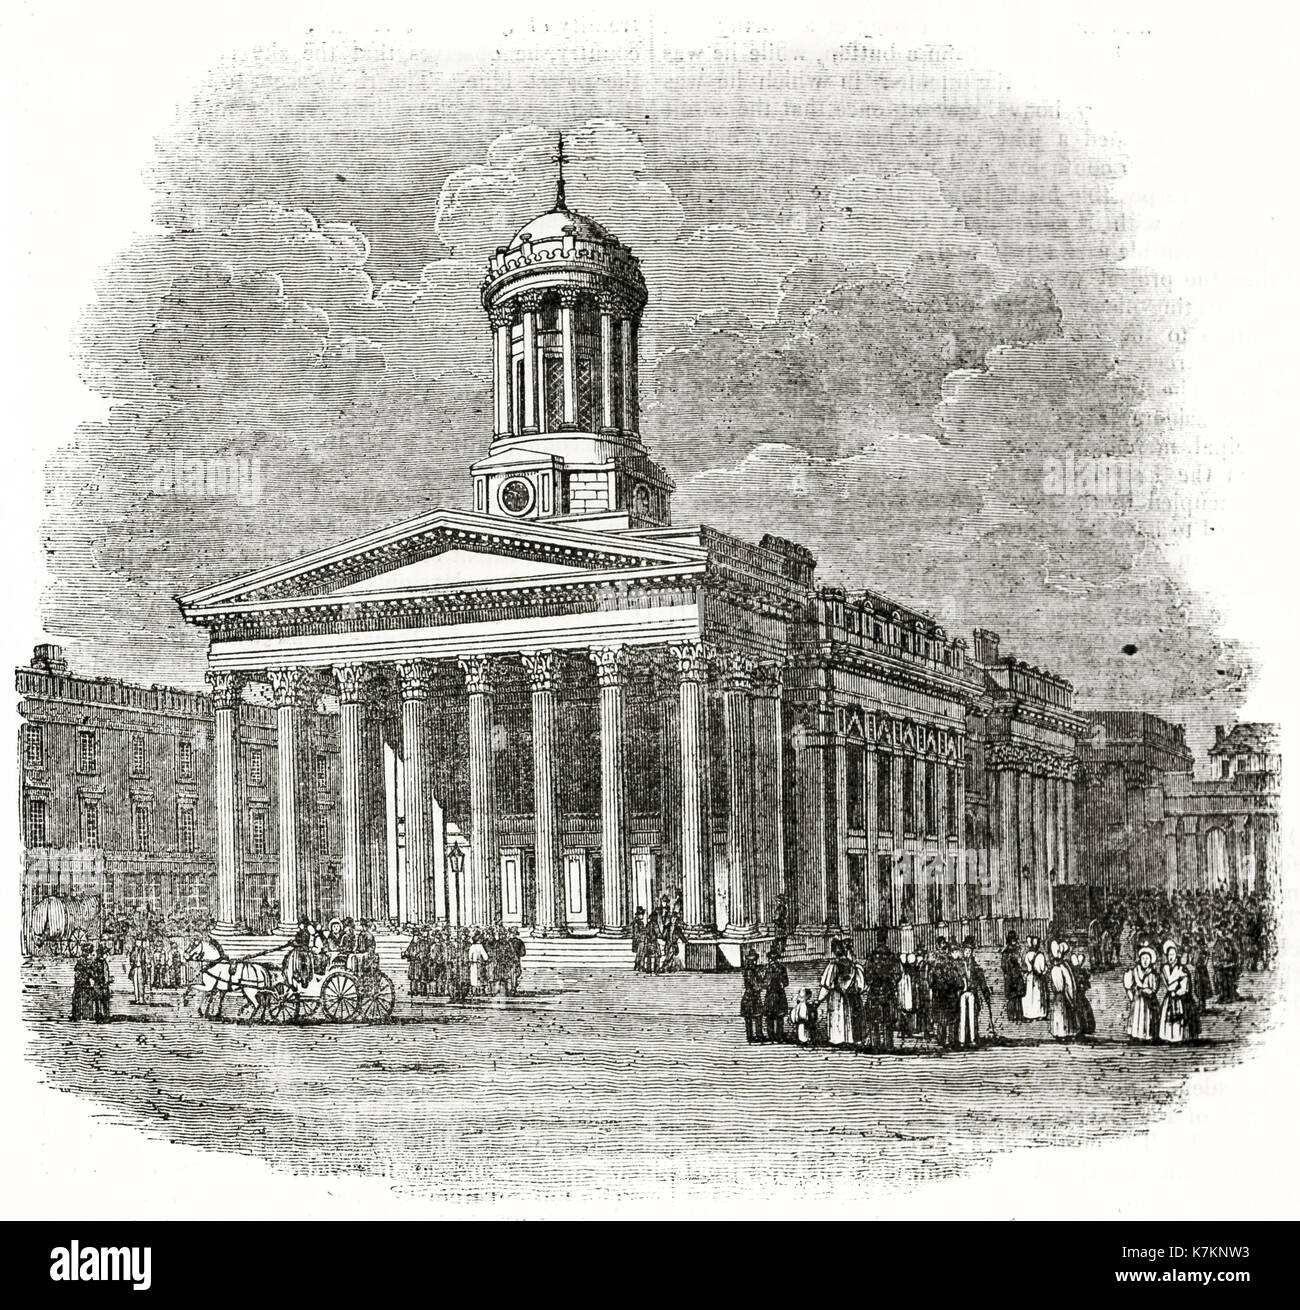 Old view of the Glasgow Exchange, Scotland. By unidentified author, publ. on The Penny Magazine, London, 1837 Stock Photo